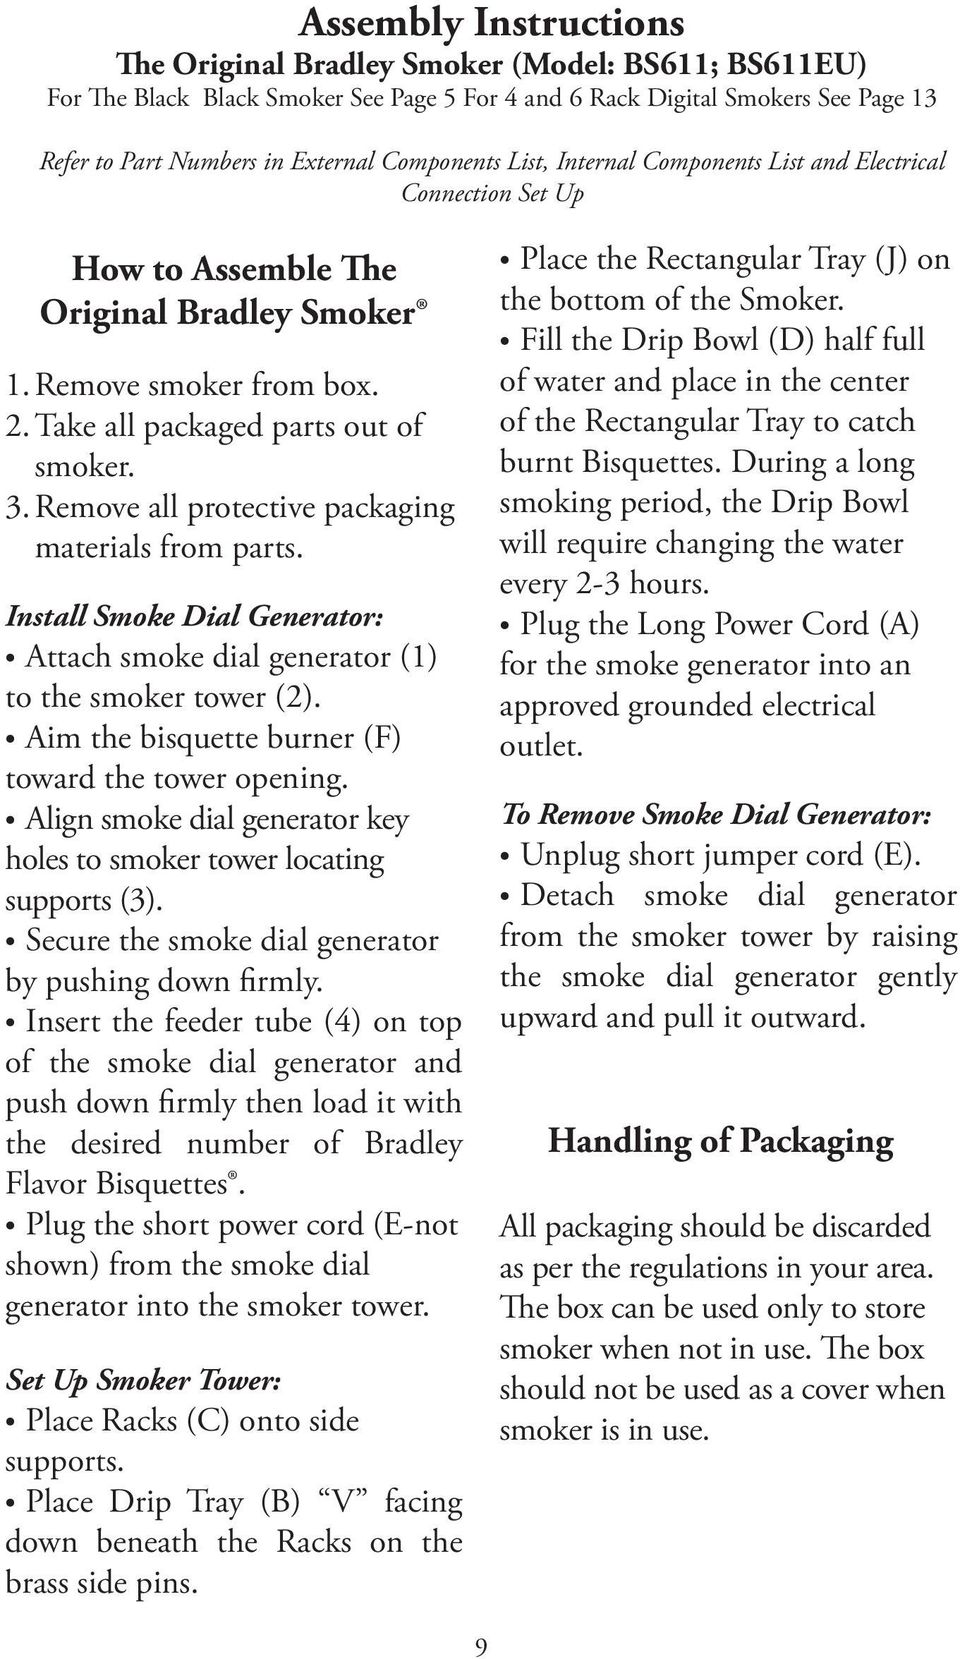 Remove all protective packaging materials from parts. Install Smoke Dial Generator: Attach smoke dial generator (1) to the smoker tower (2). Aim the bisquette burner (F) toward the tower opening.